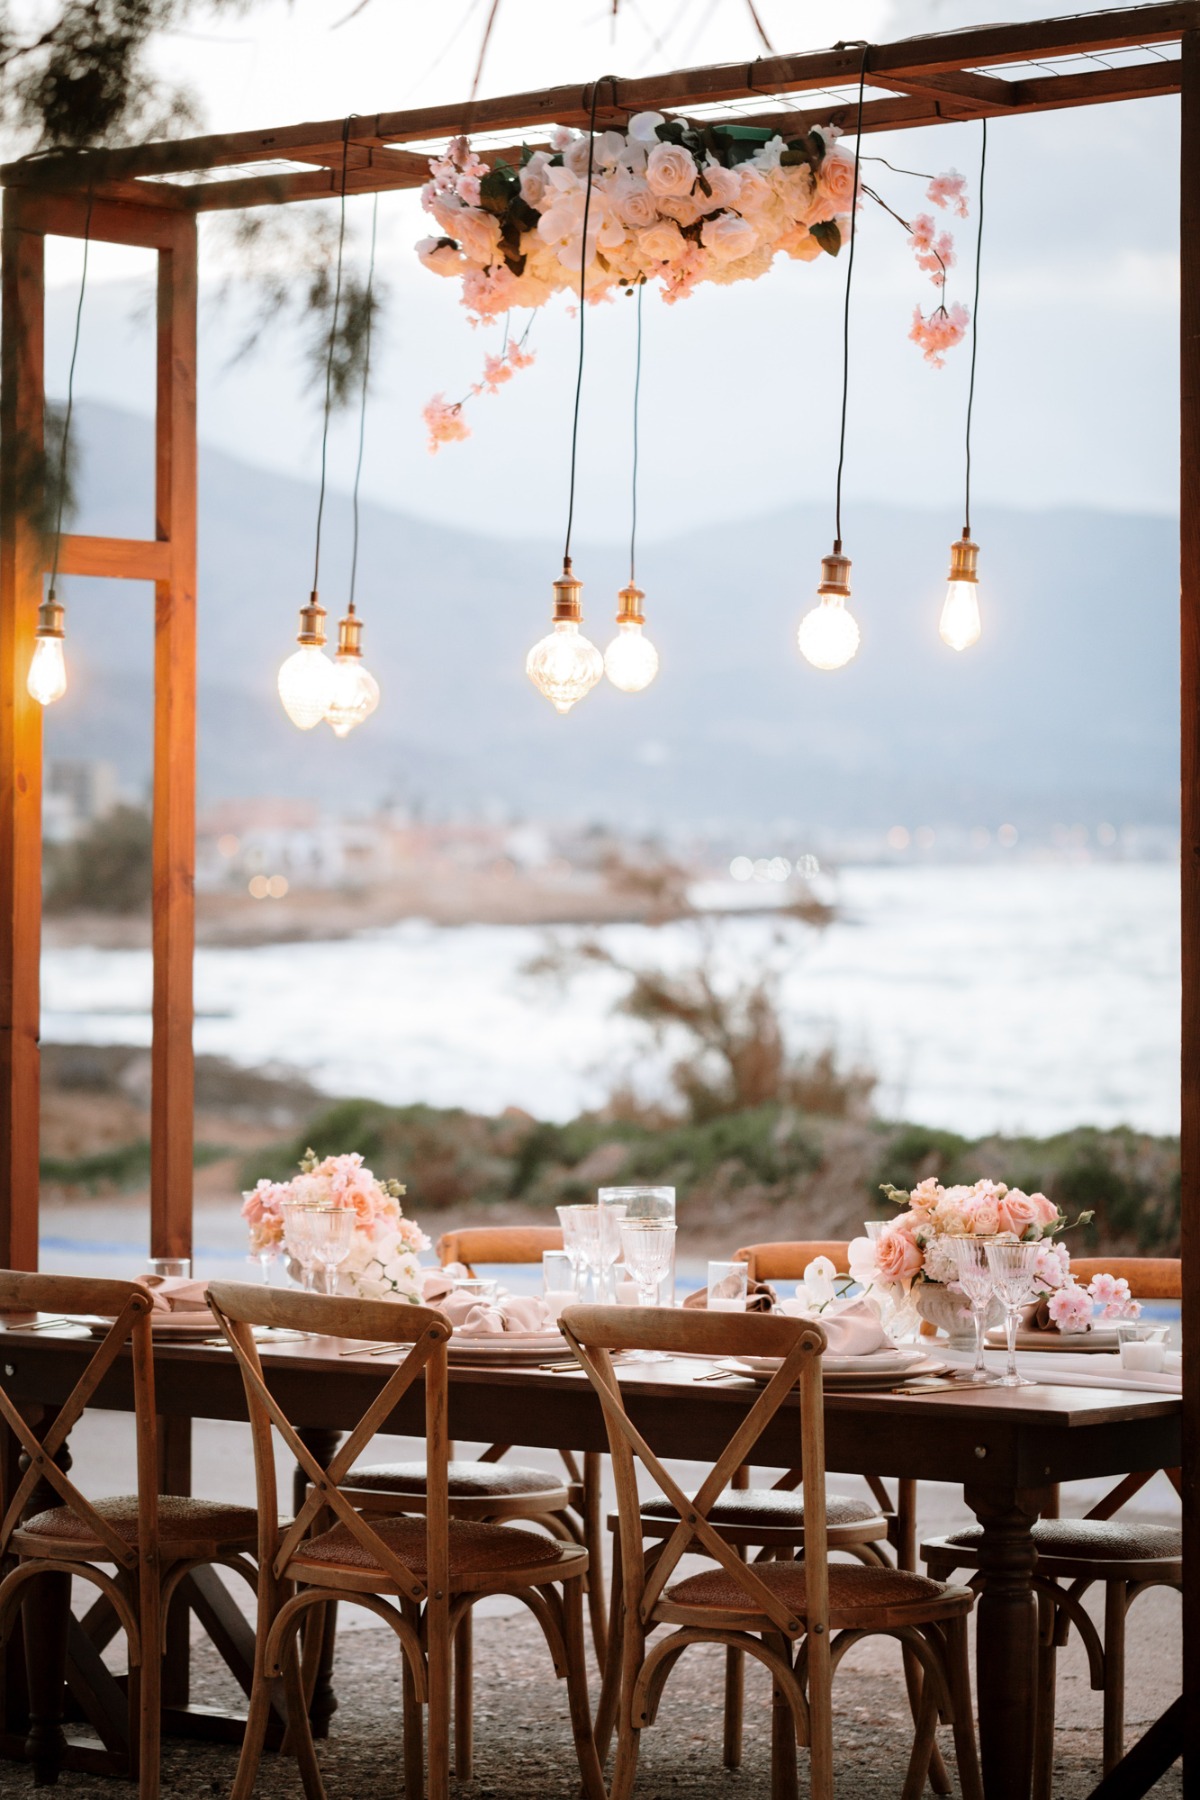 There's A Formula For The Perfect Beach Wedding...And Here It Is